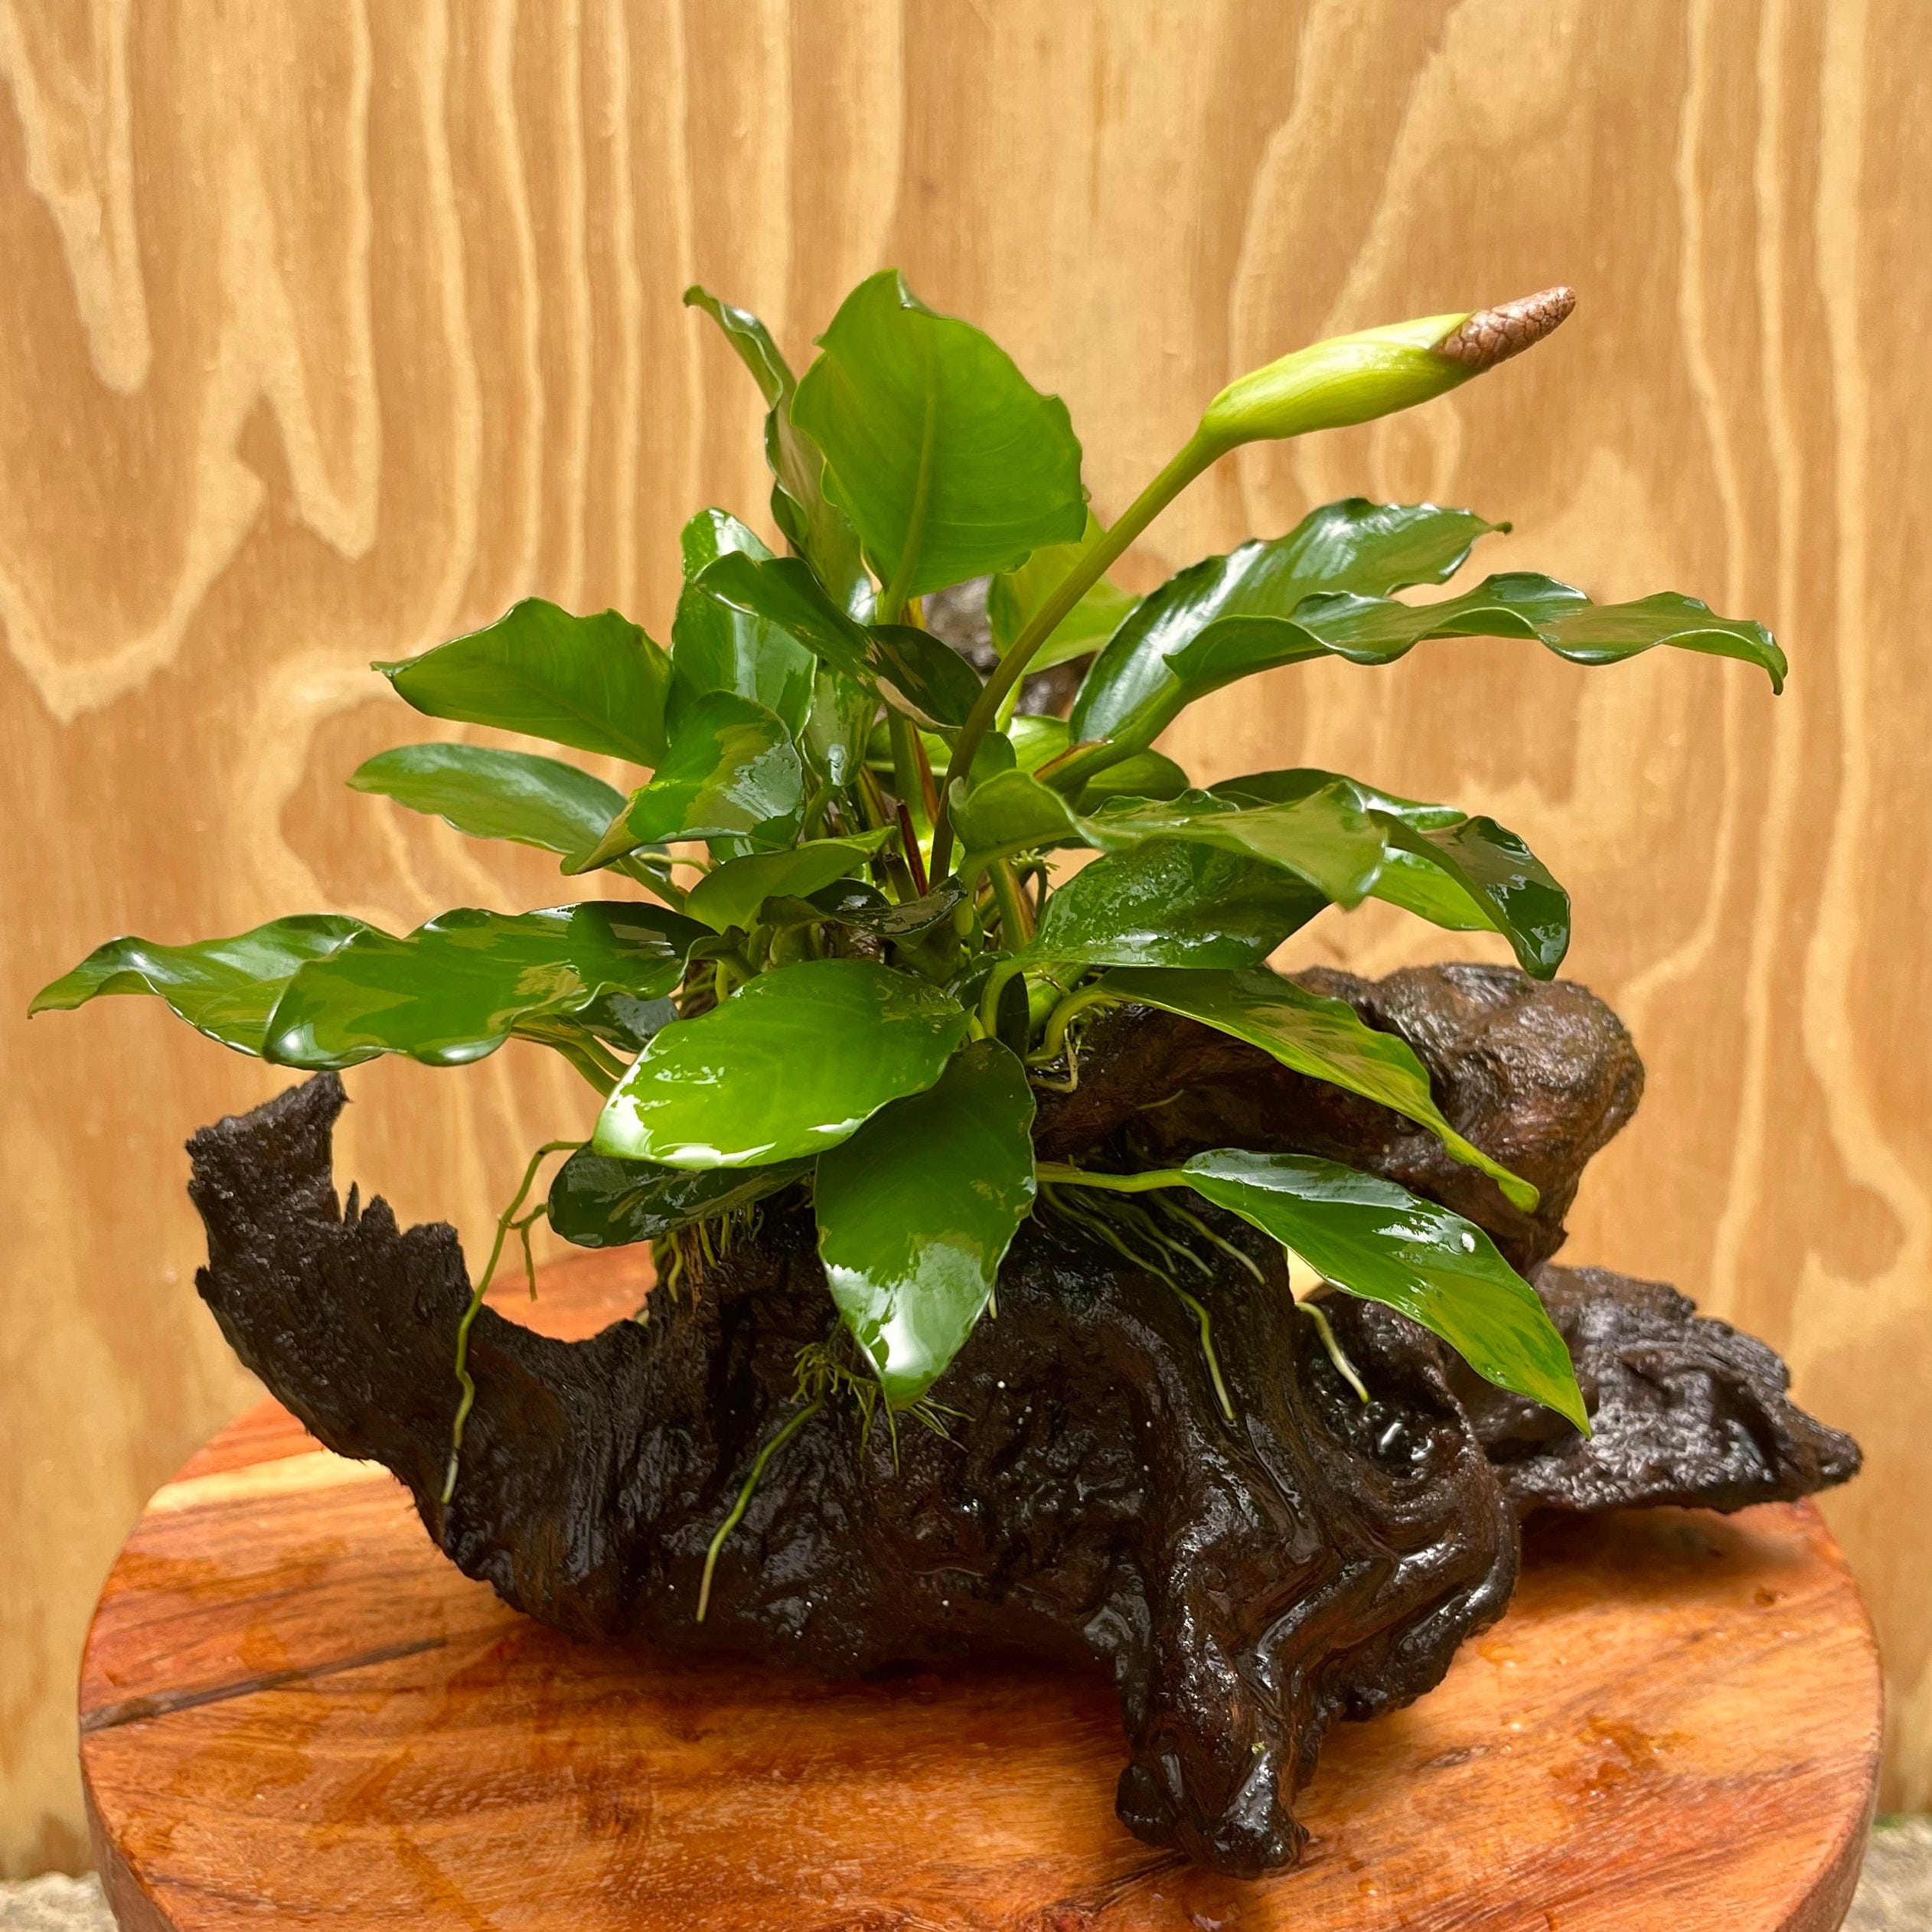 Pisces Enterprises Driftwood Creation Anubias Angela on Large Driftwood Creation - ONE ONLY Anubias Angela on Large Driftwood Aquarium Plants - one only